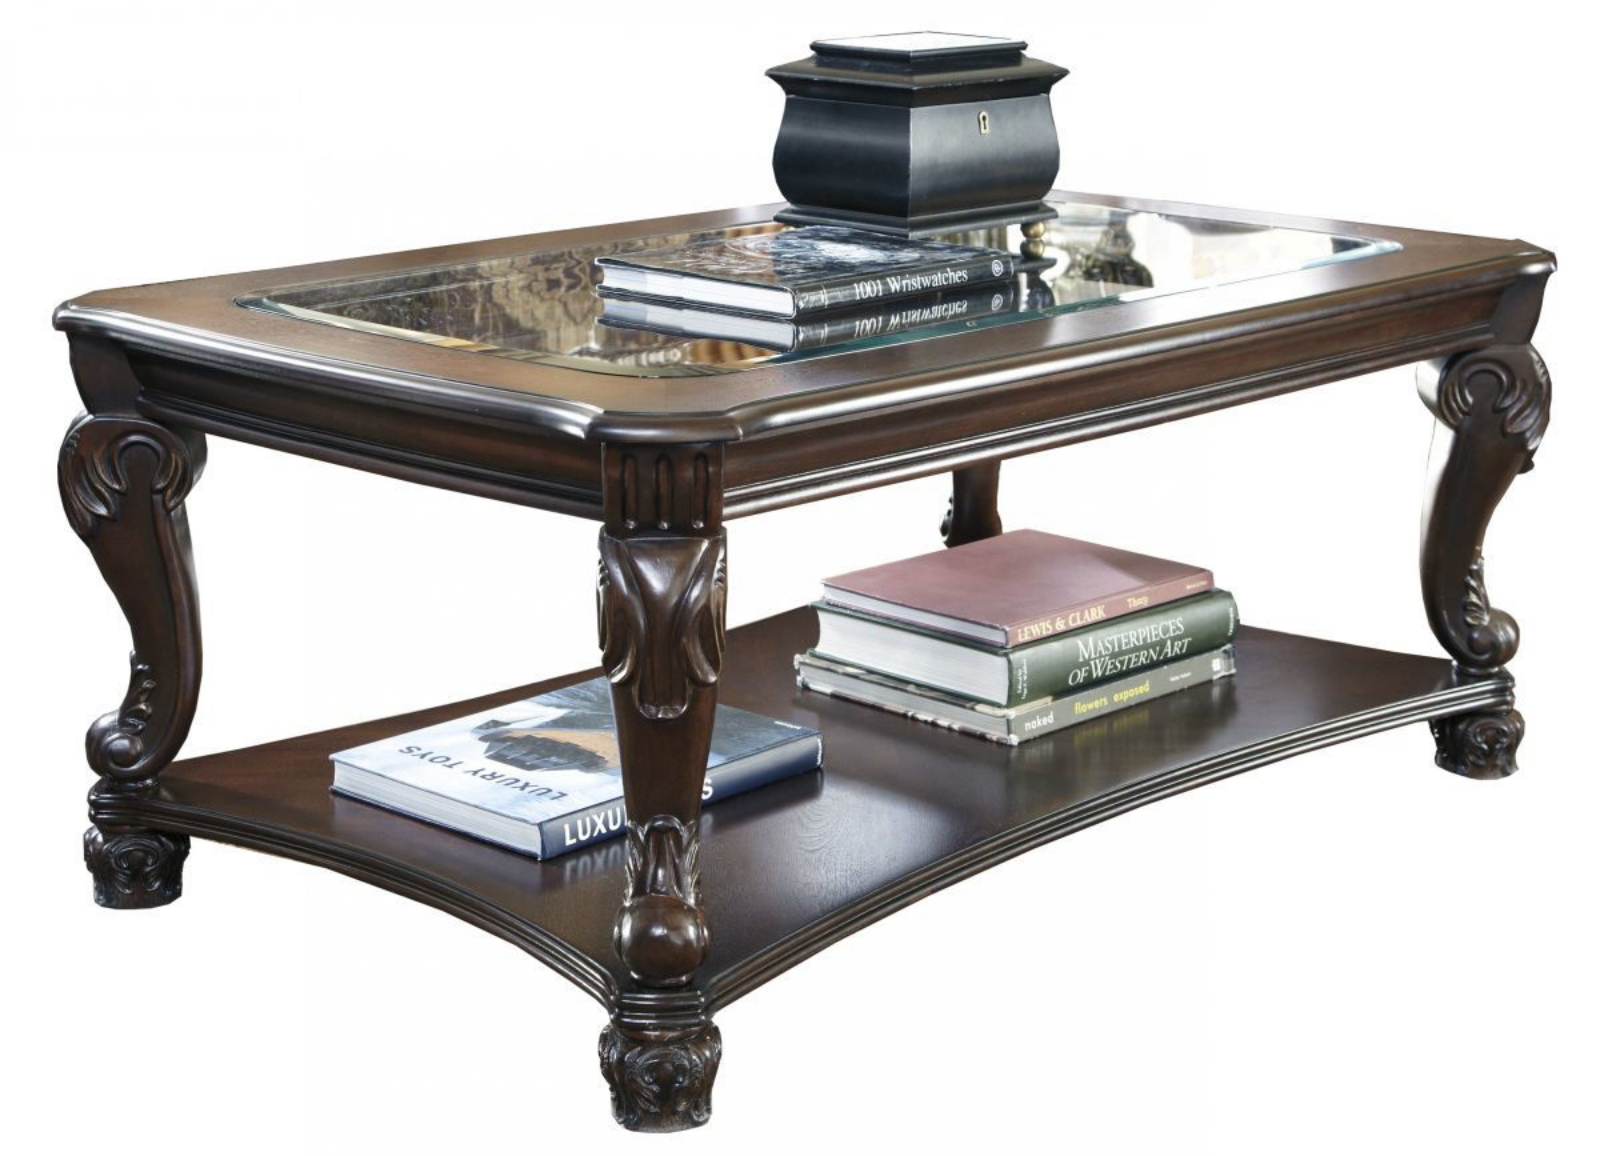 Picture of Norcastle Coffee Table